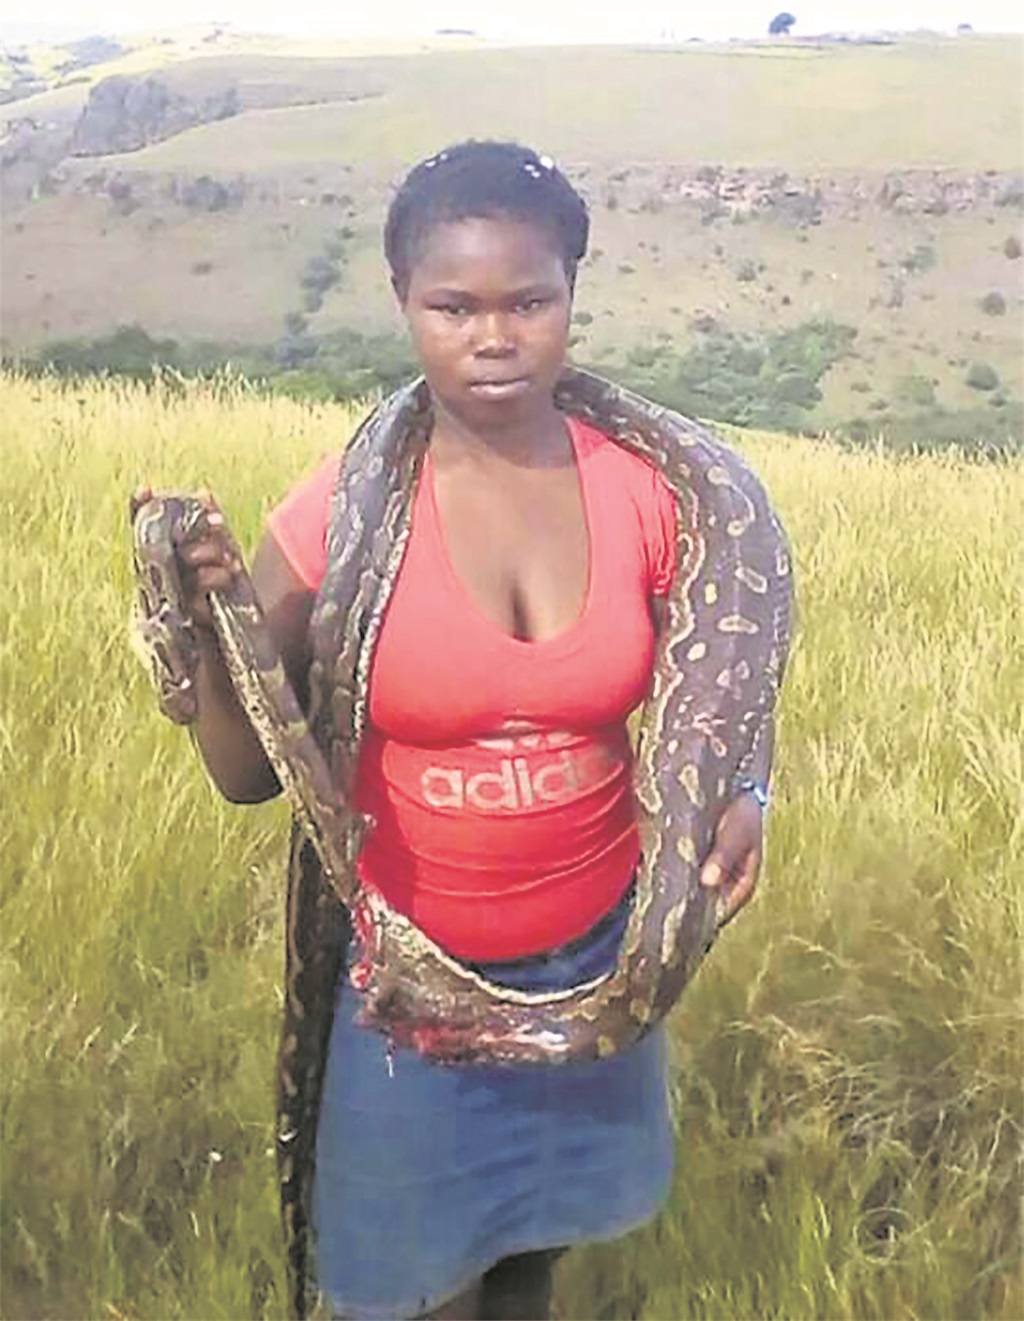 Khombi Dlamini says killing the python may have brought her bad luck.